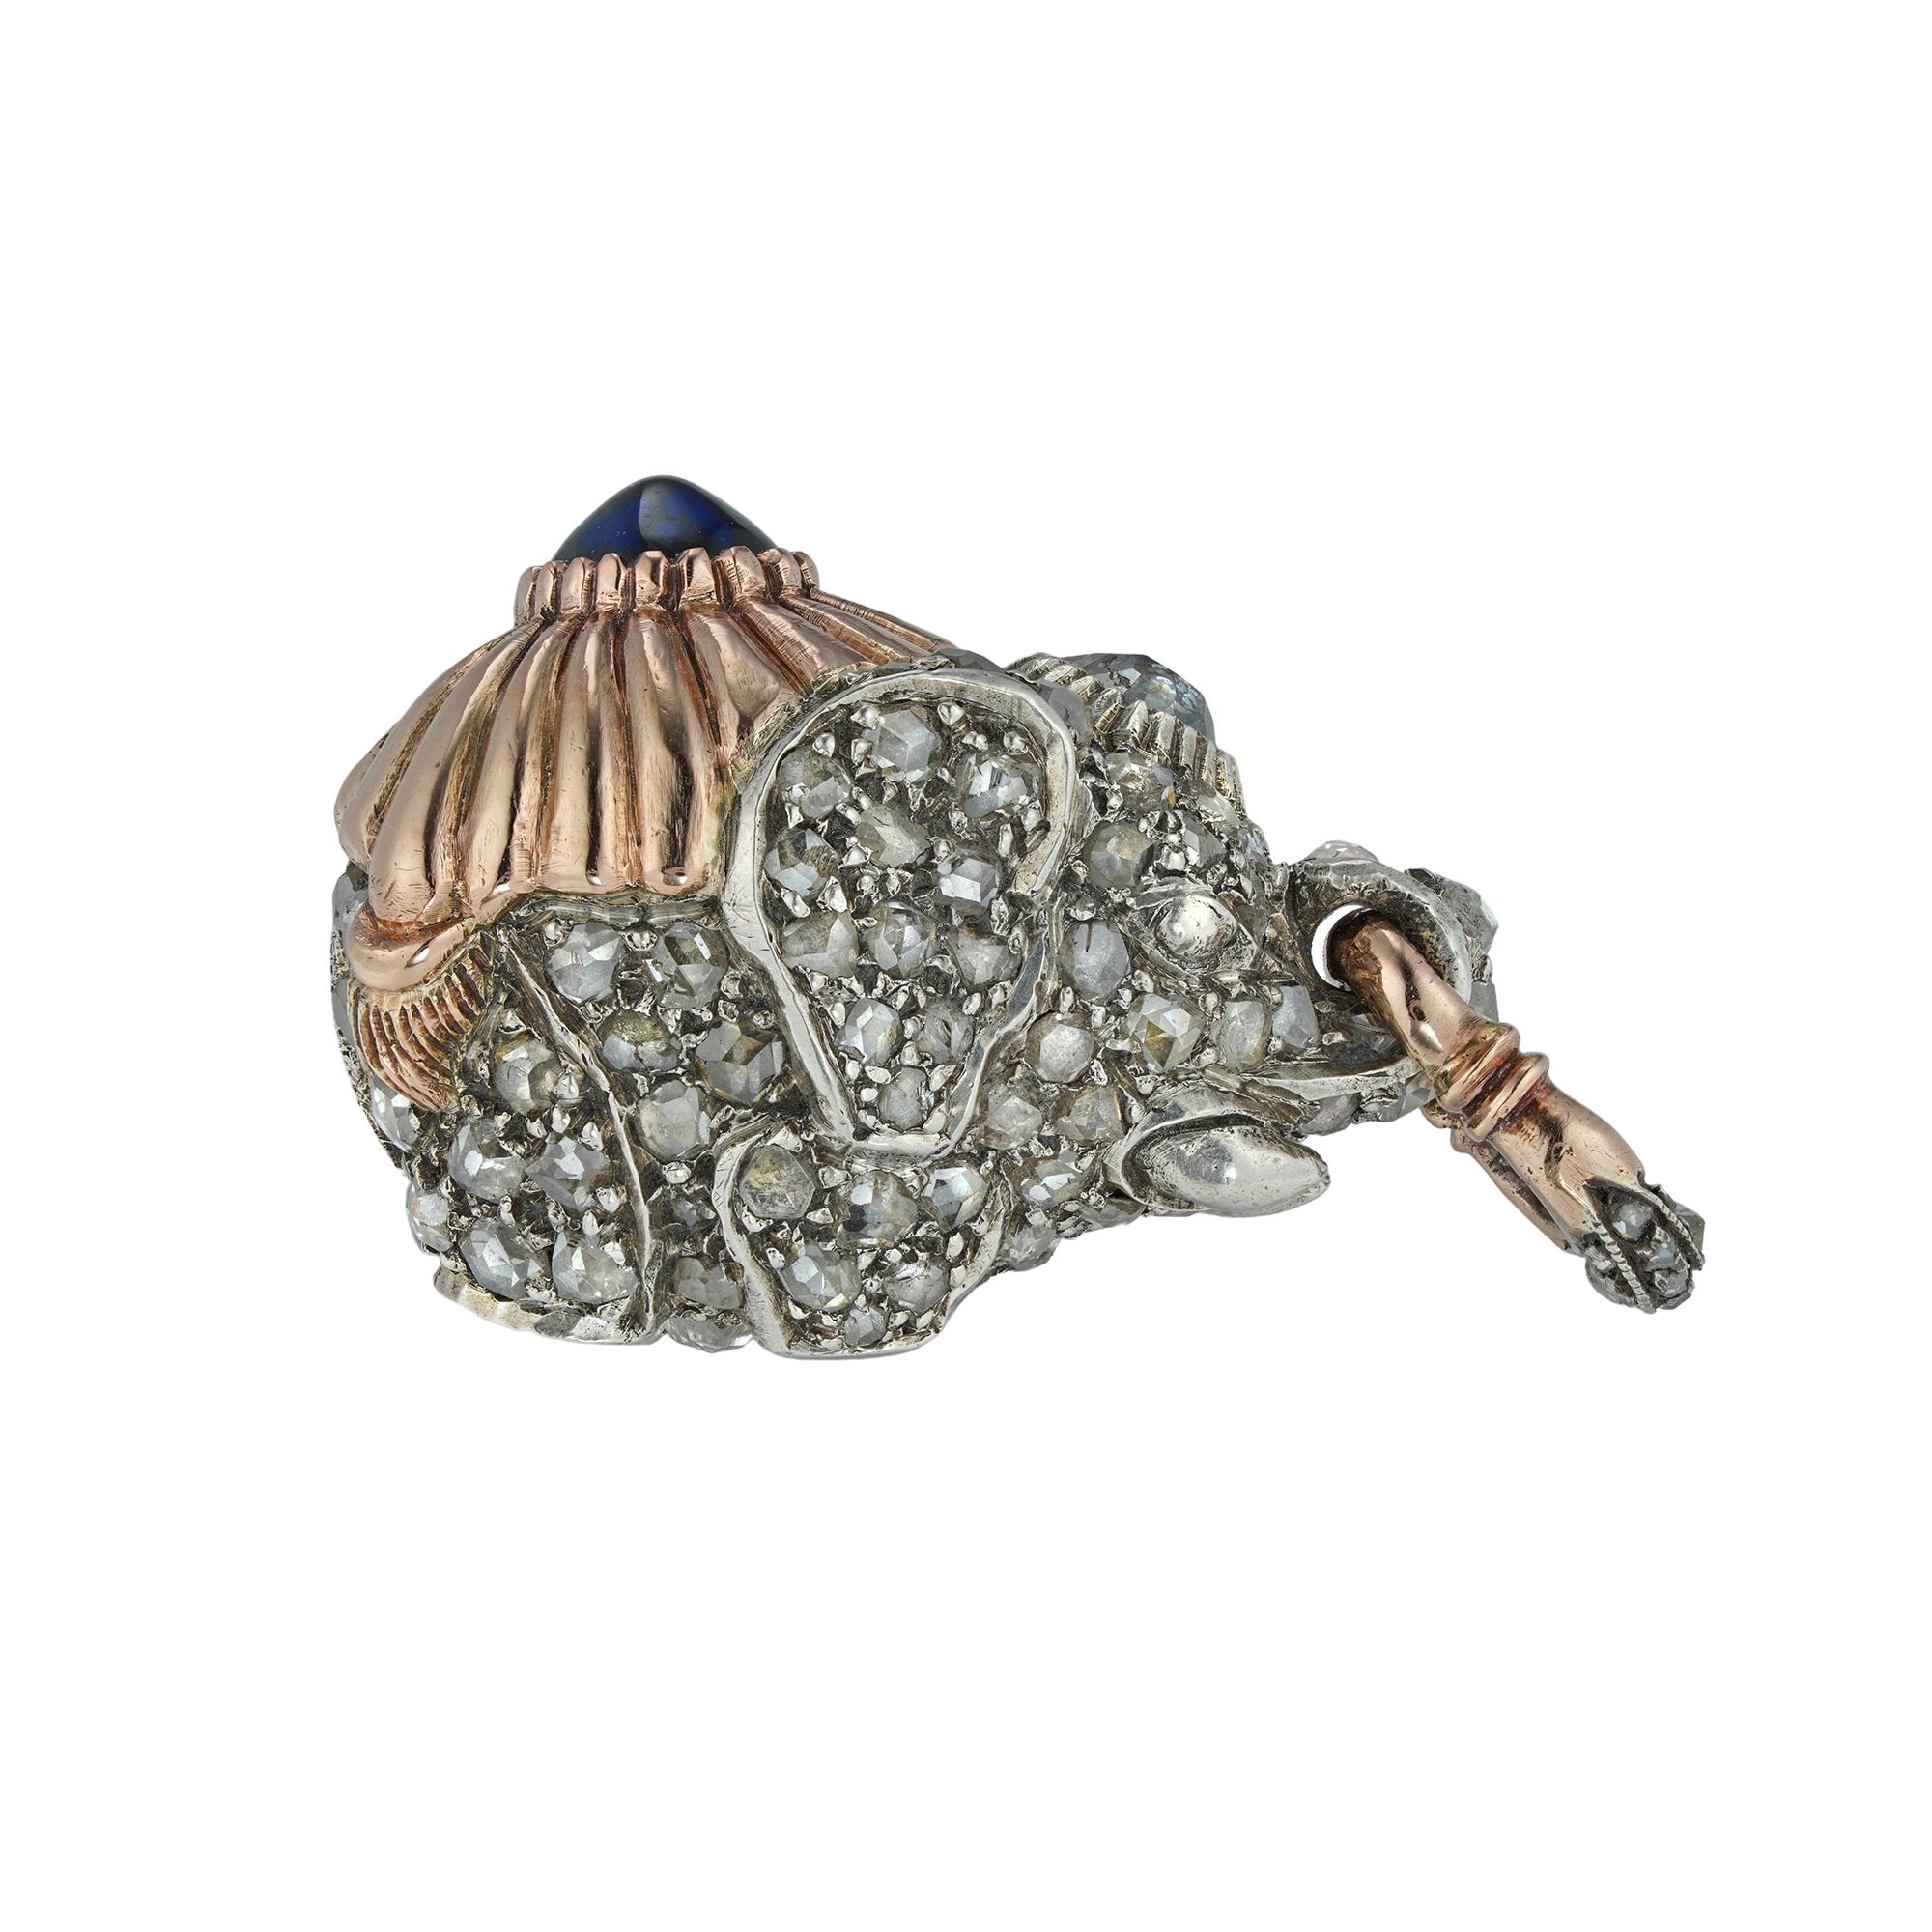 A Faberge diamond-set elephant pendant, with rose-cut and old-cut diamonds set throughout on silver, the back decorated with a rose gold saddle cloth with extending gold tassels the centre set with a cabochon-cut sapphire, suspended from a